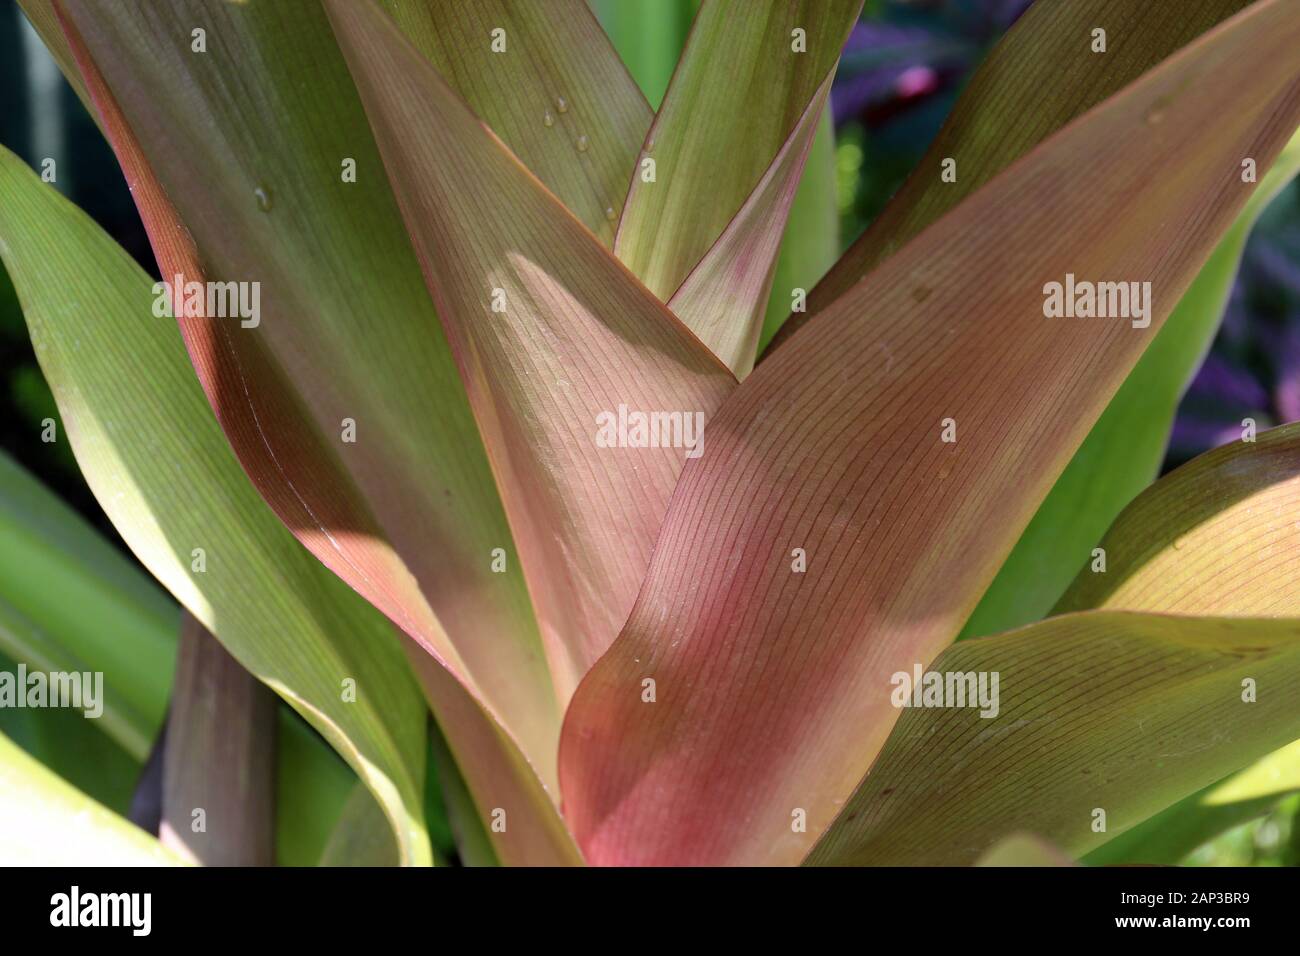 Close up of the veined leaves of a Purple Queen Lily plant with water droplets Stock Photo